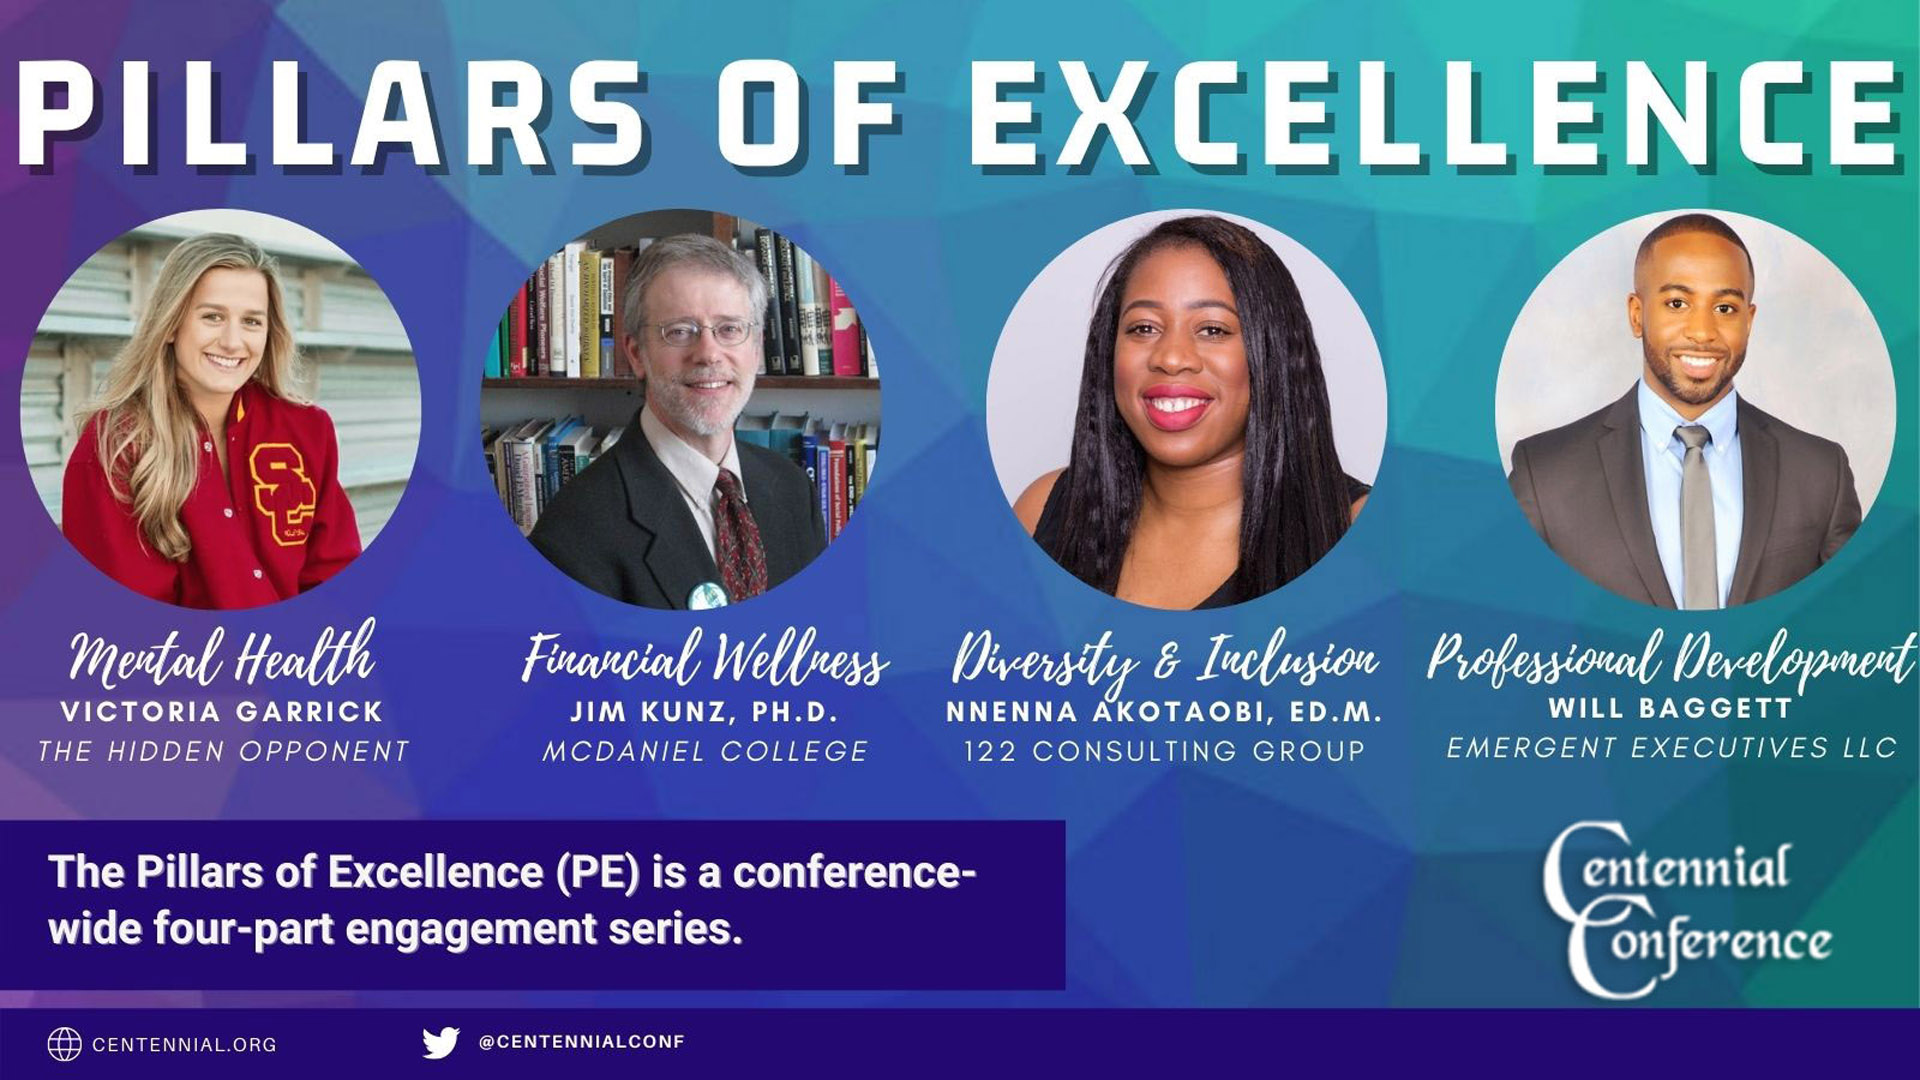 Centennial Conference Announces Part Three of the Pillars of Excellence Speaker Series